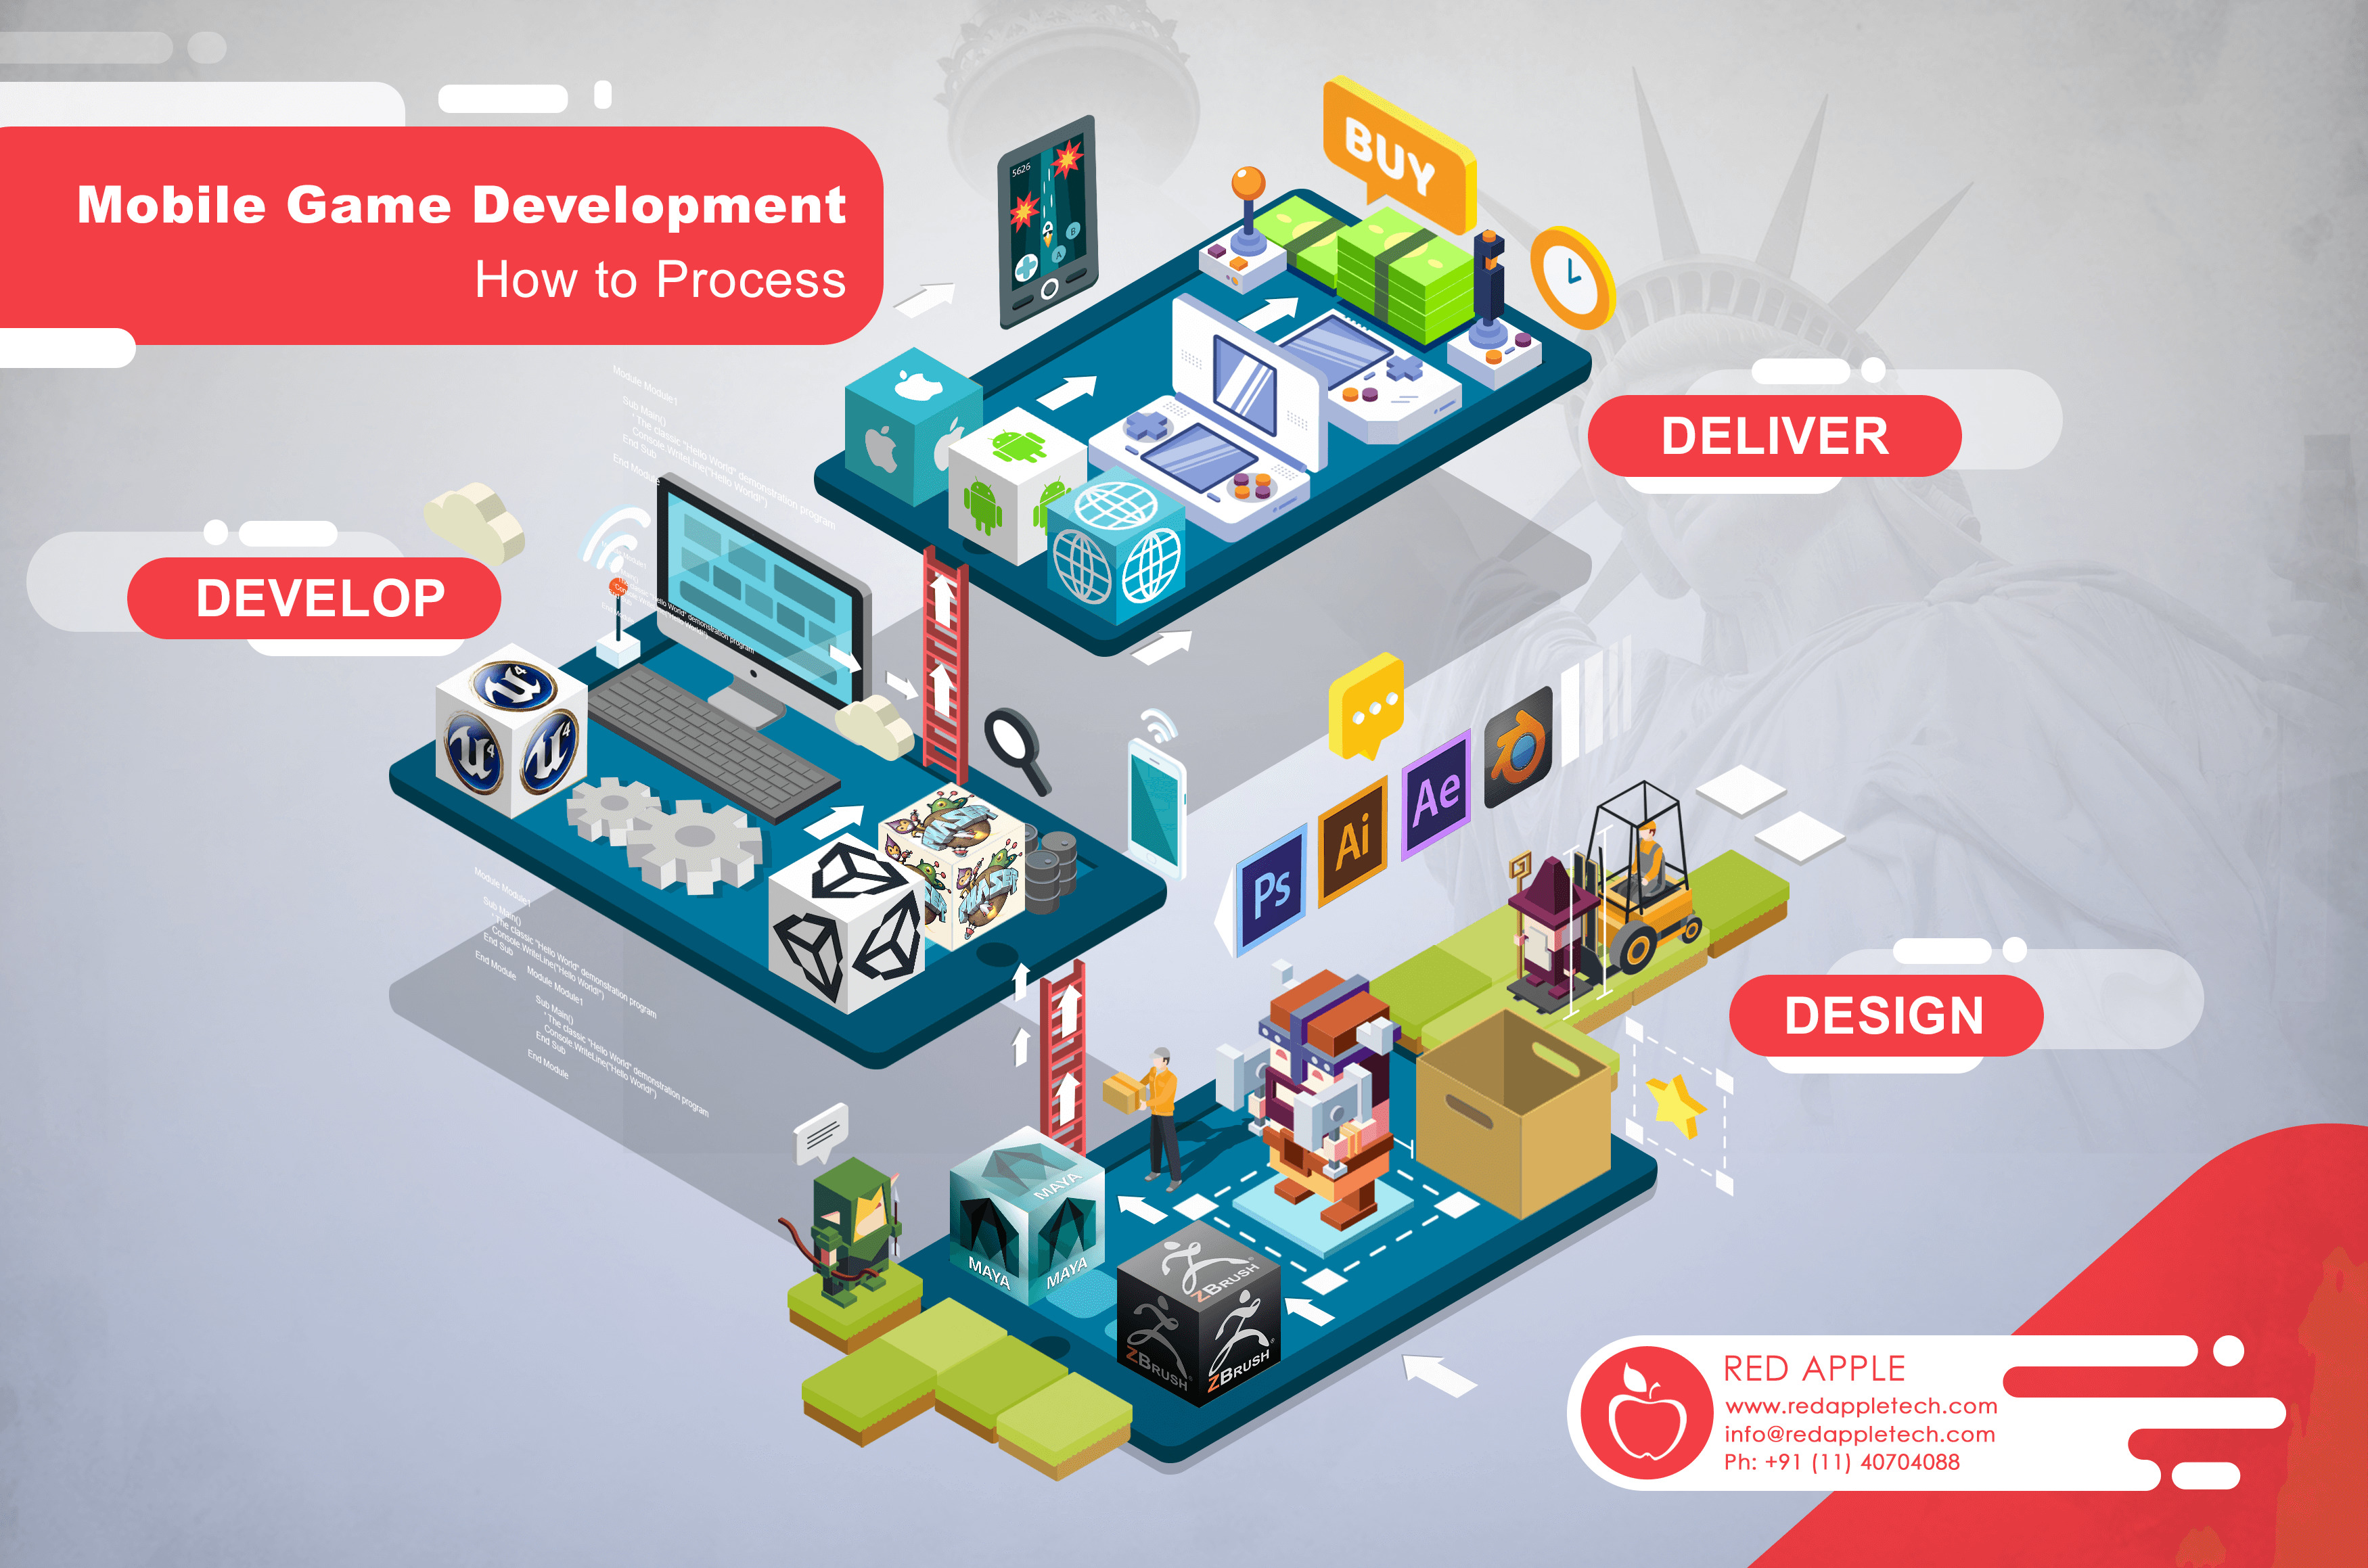 How to Process a Successful Mobile Game Development? Think About It!